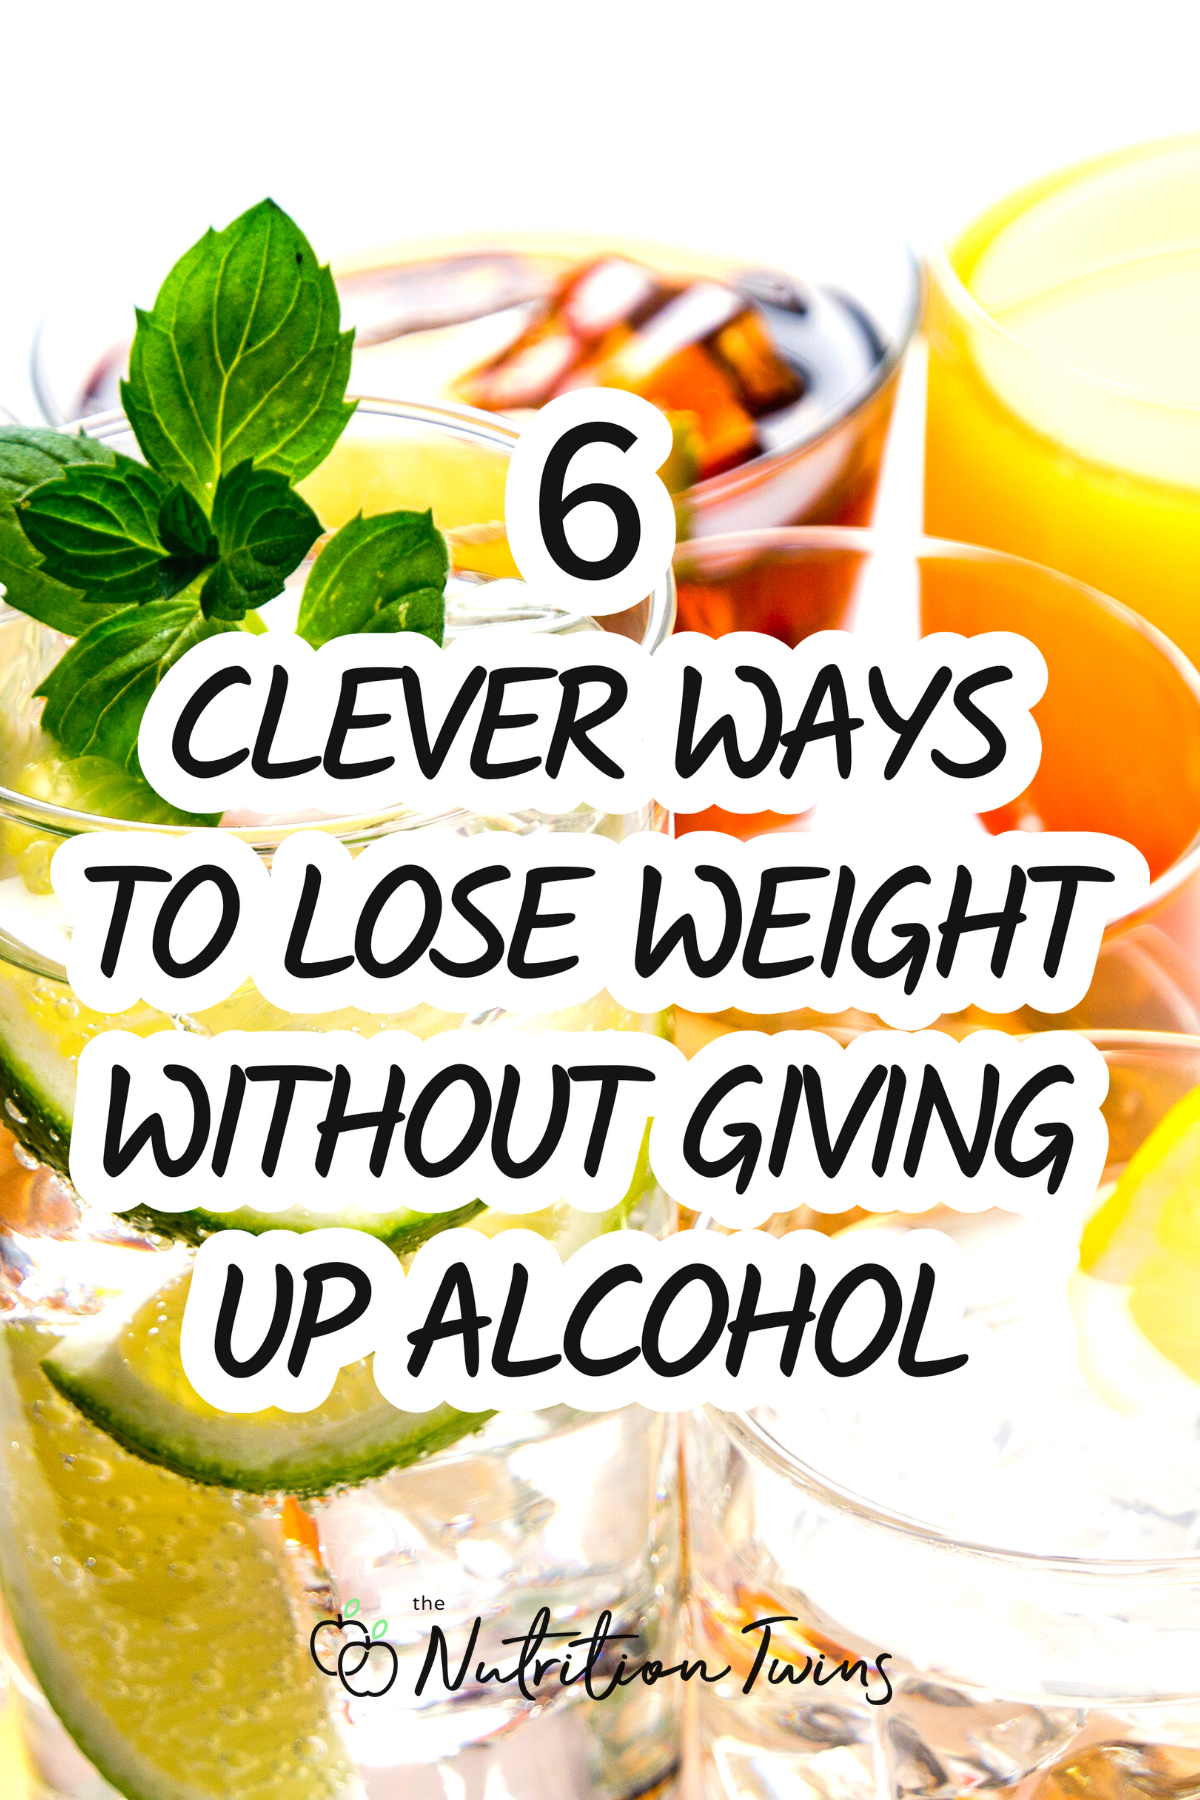 6 Clever Ways to Lose Weight Without Giving Up Alcohol